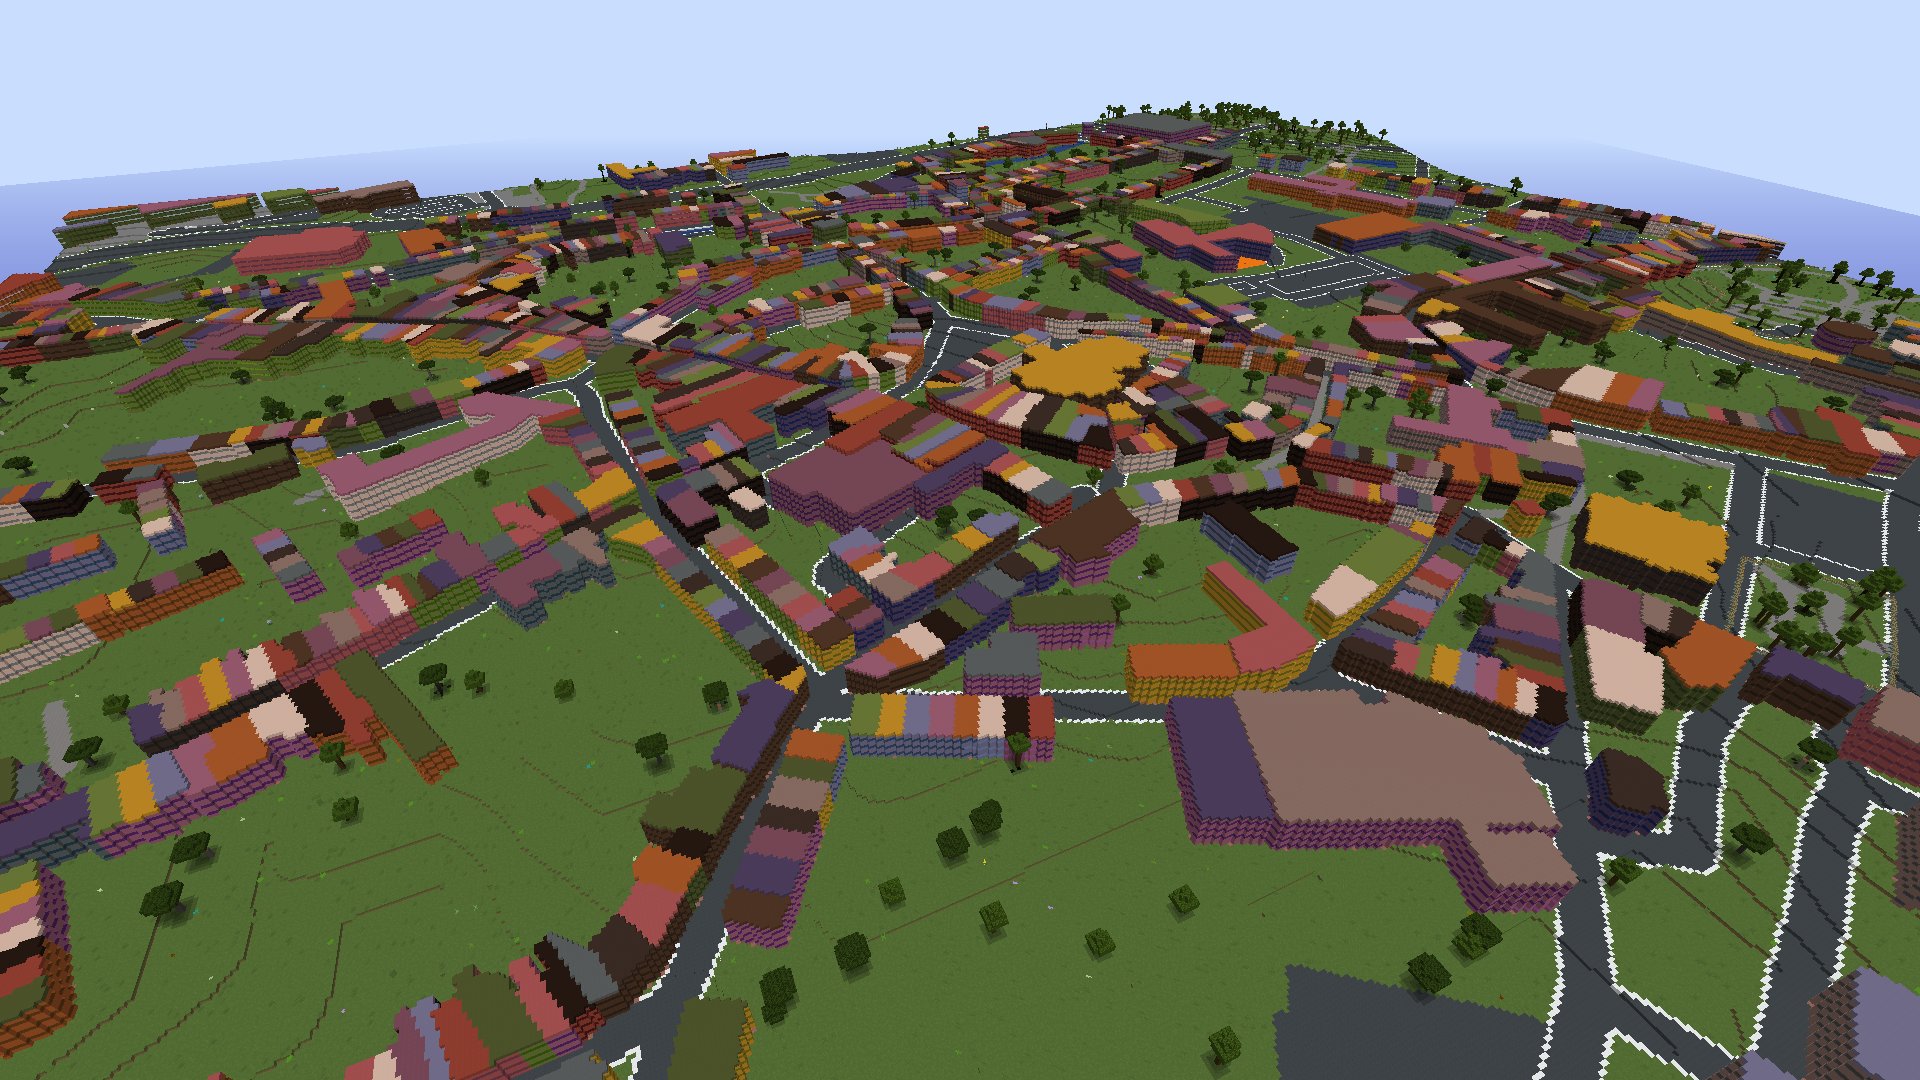 Minecraft maps of the real world from data - by GeoBoxers